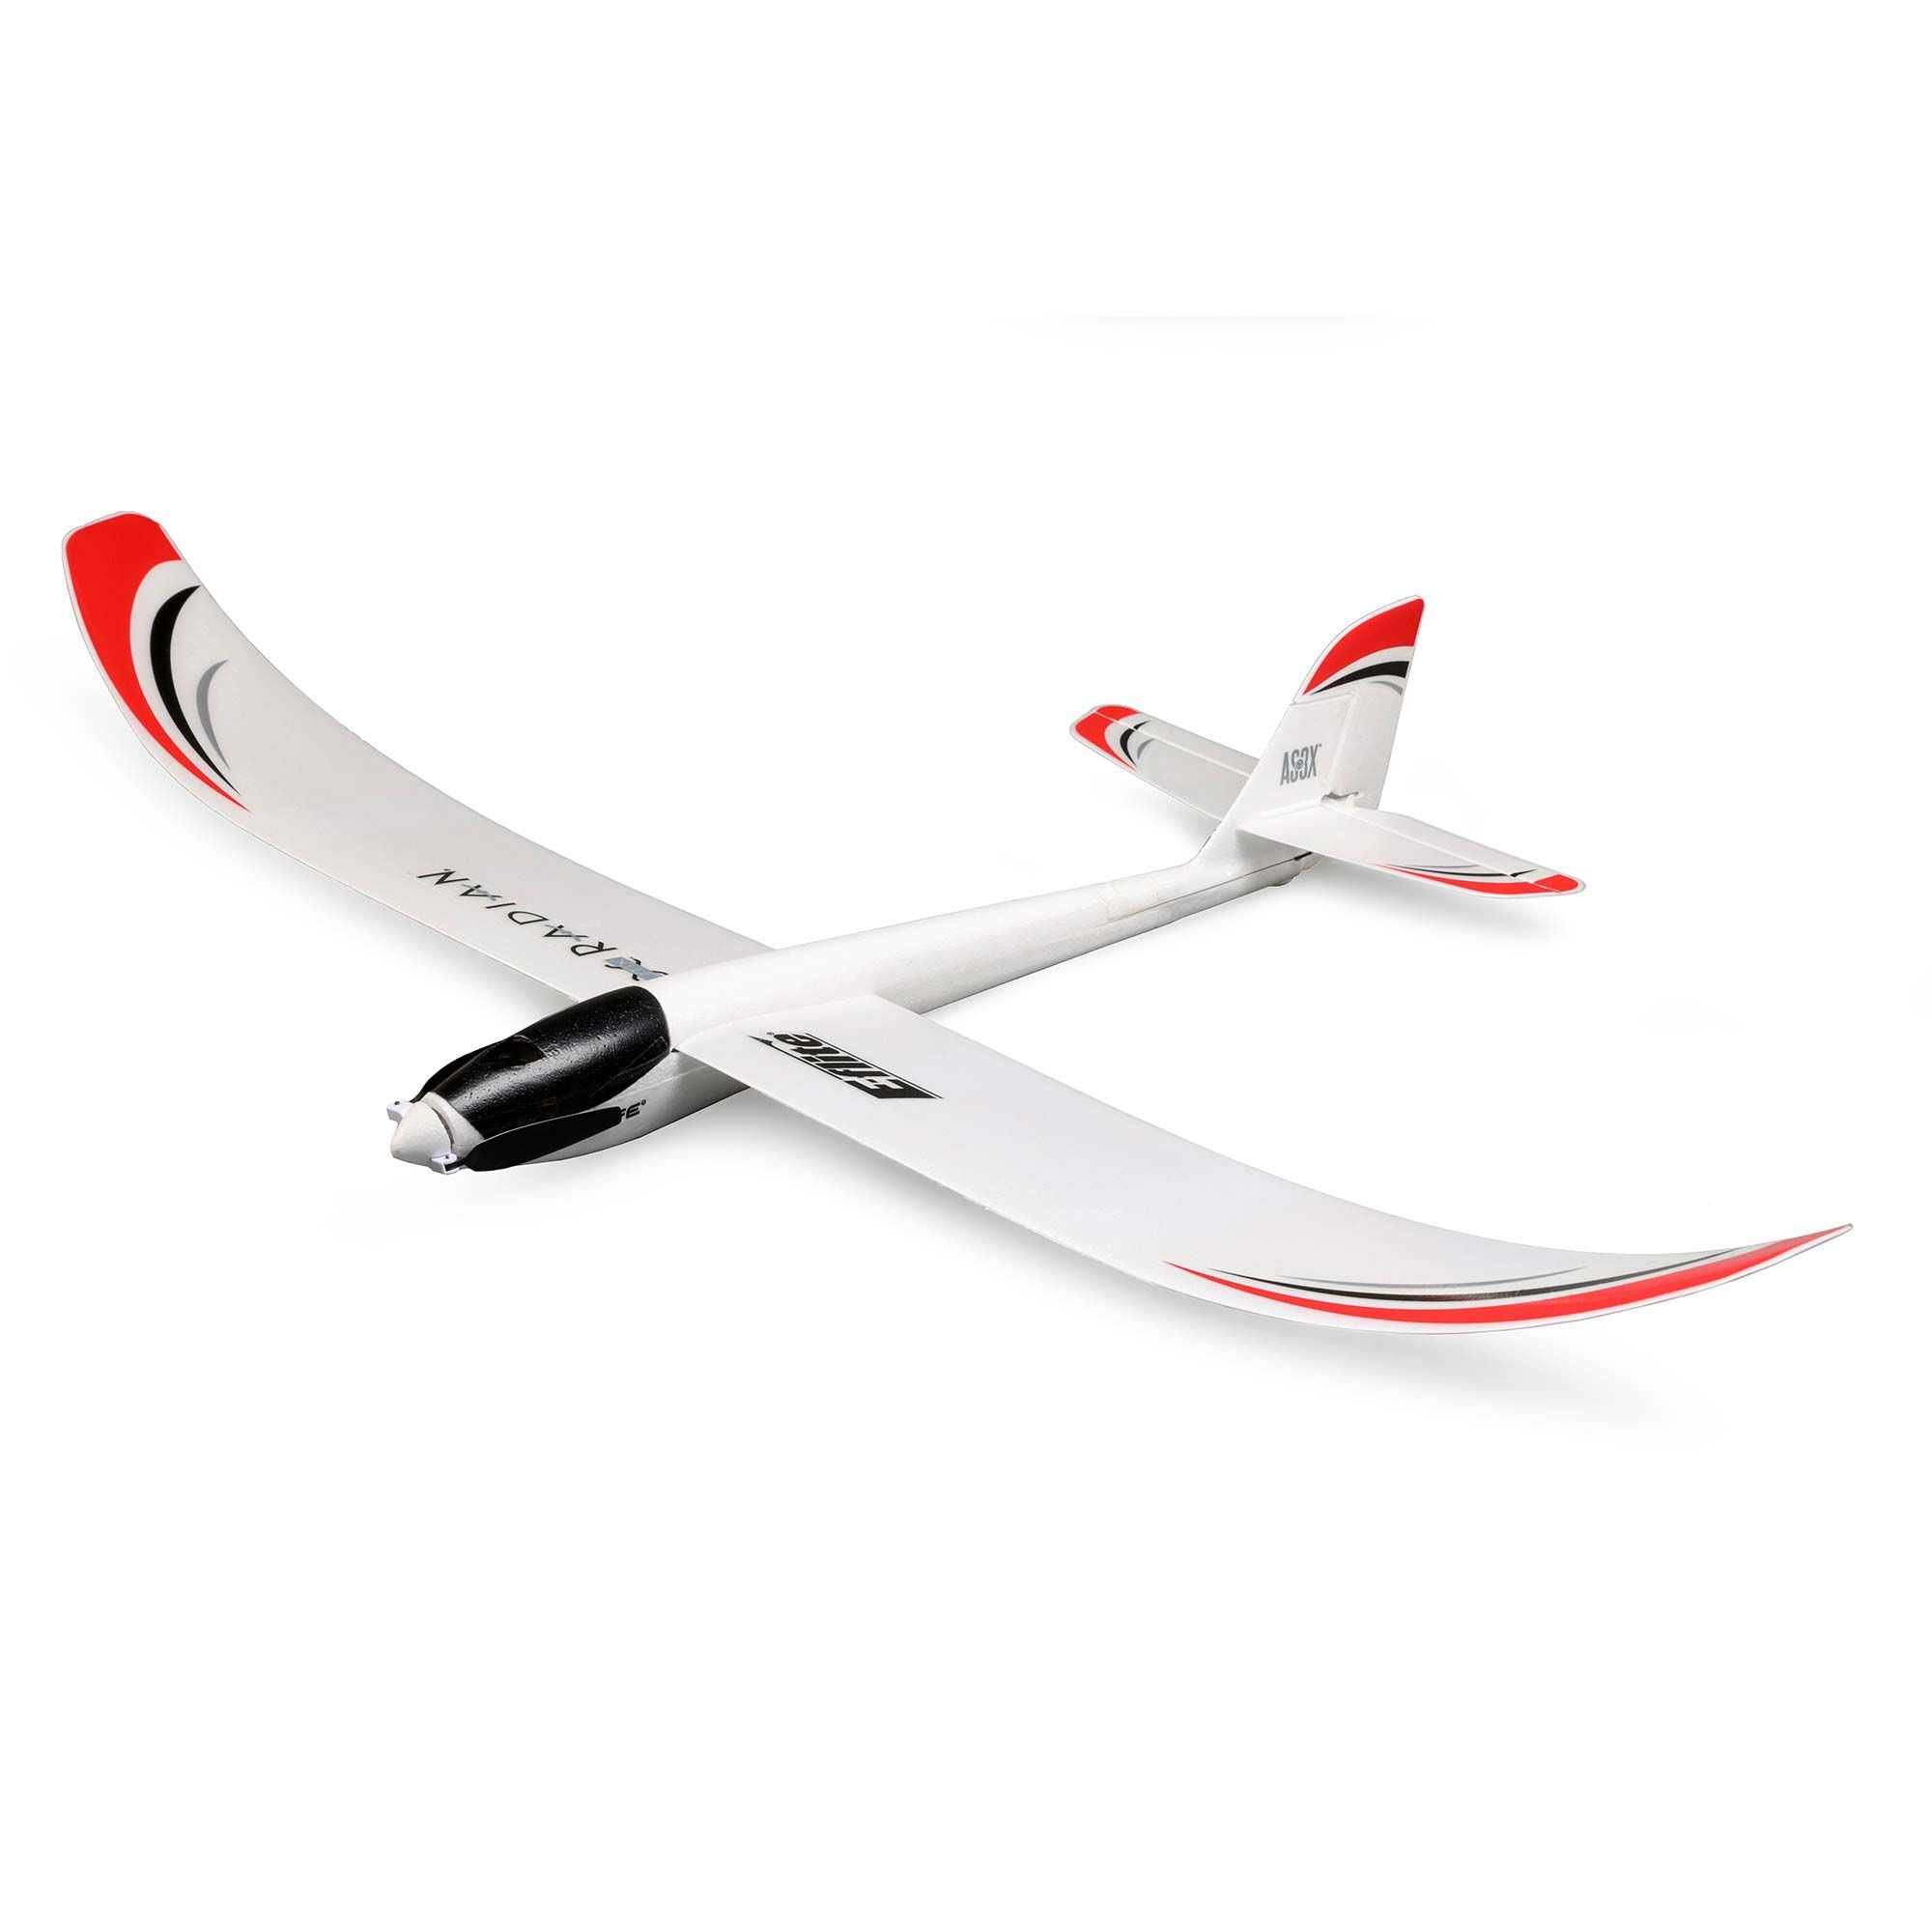 EFLITE EFLU2950 UMX Radian BNF Basic with AS3X and SAFE Select